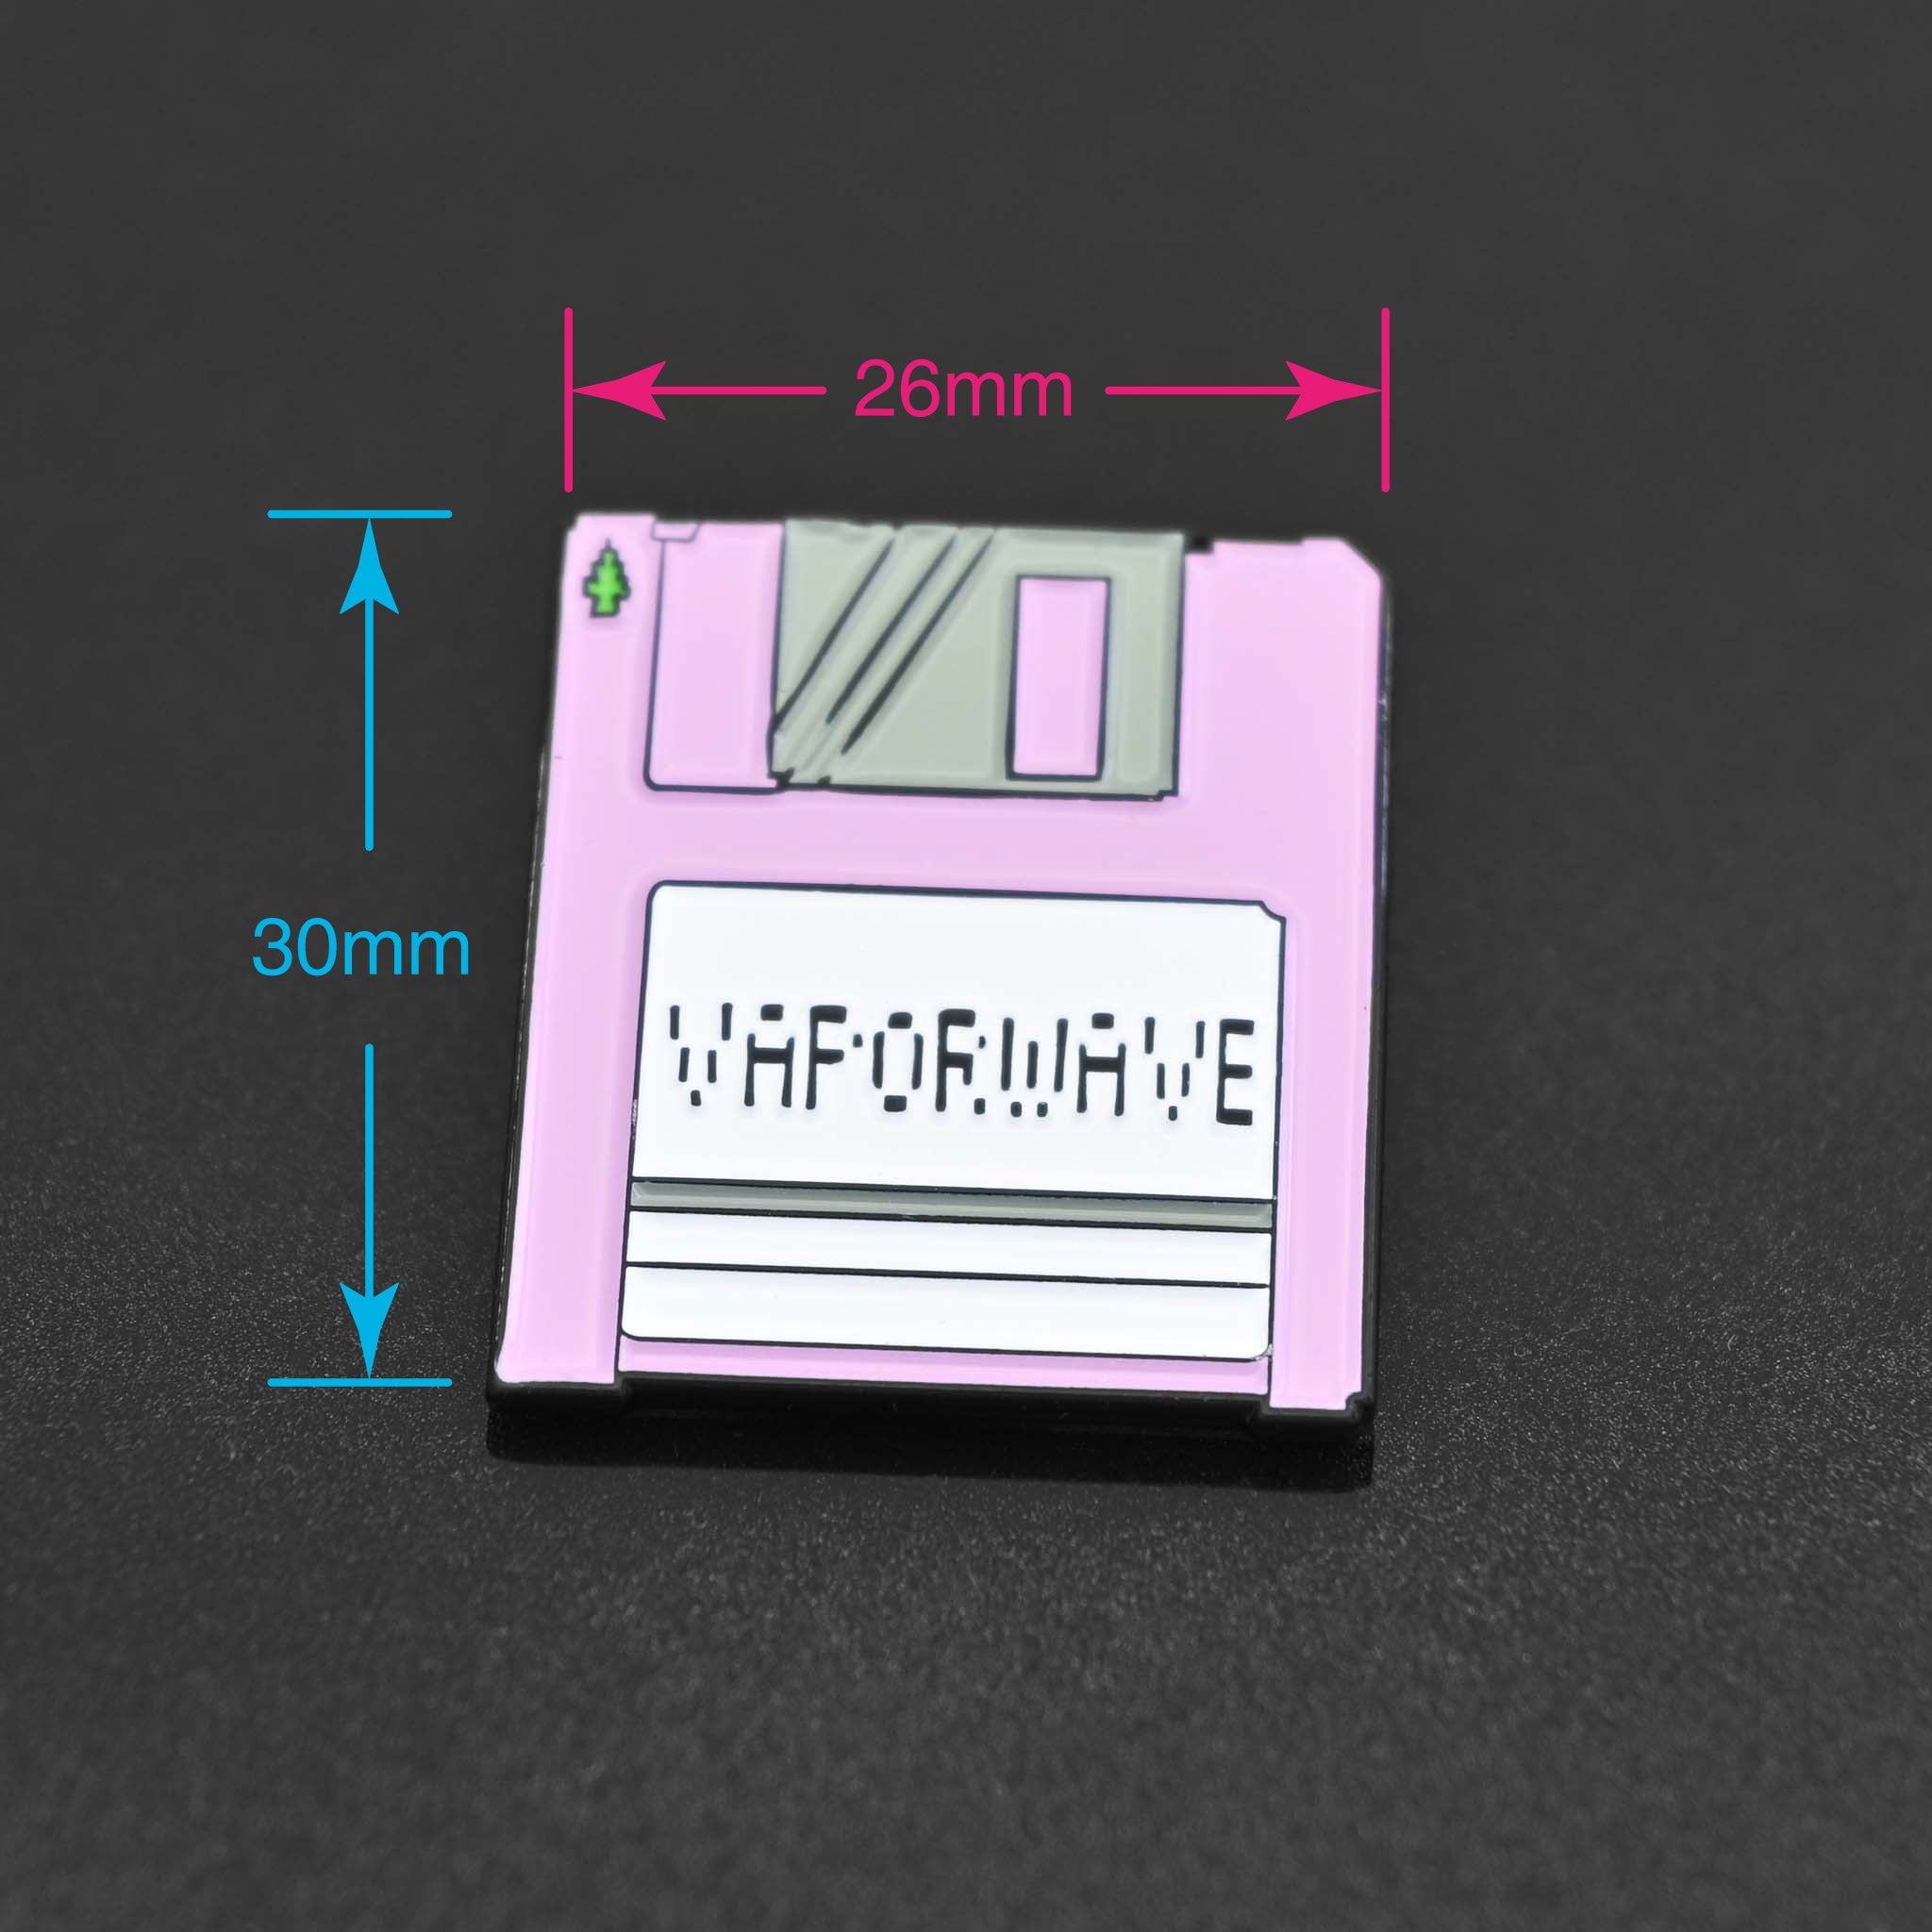 Enamel pin of a pink disk with a label of Vaporwave. 